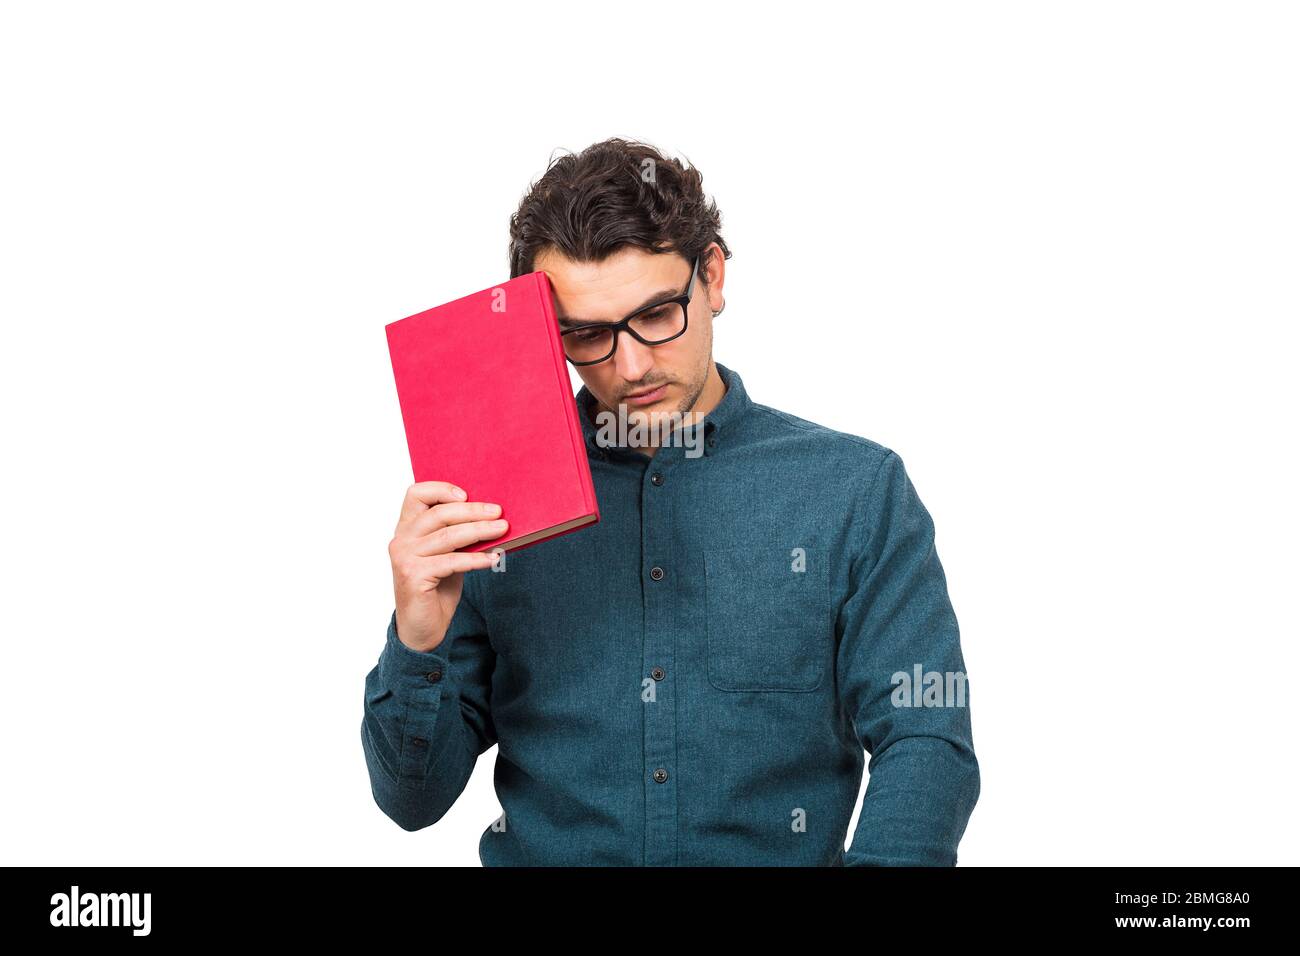 Pessimistic student guy looking down upset, as holds a book isolated on white background. Confused young man has learning troubles, negative face expr Stock Photo